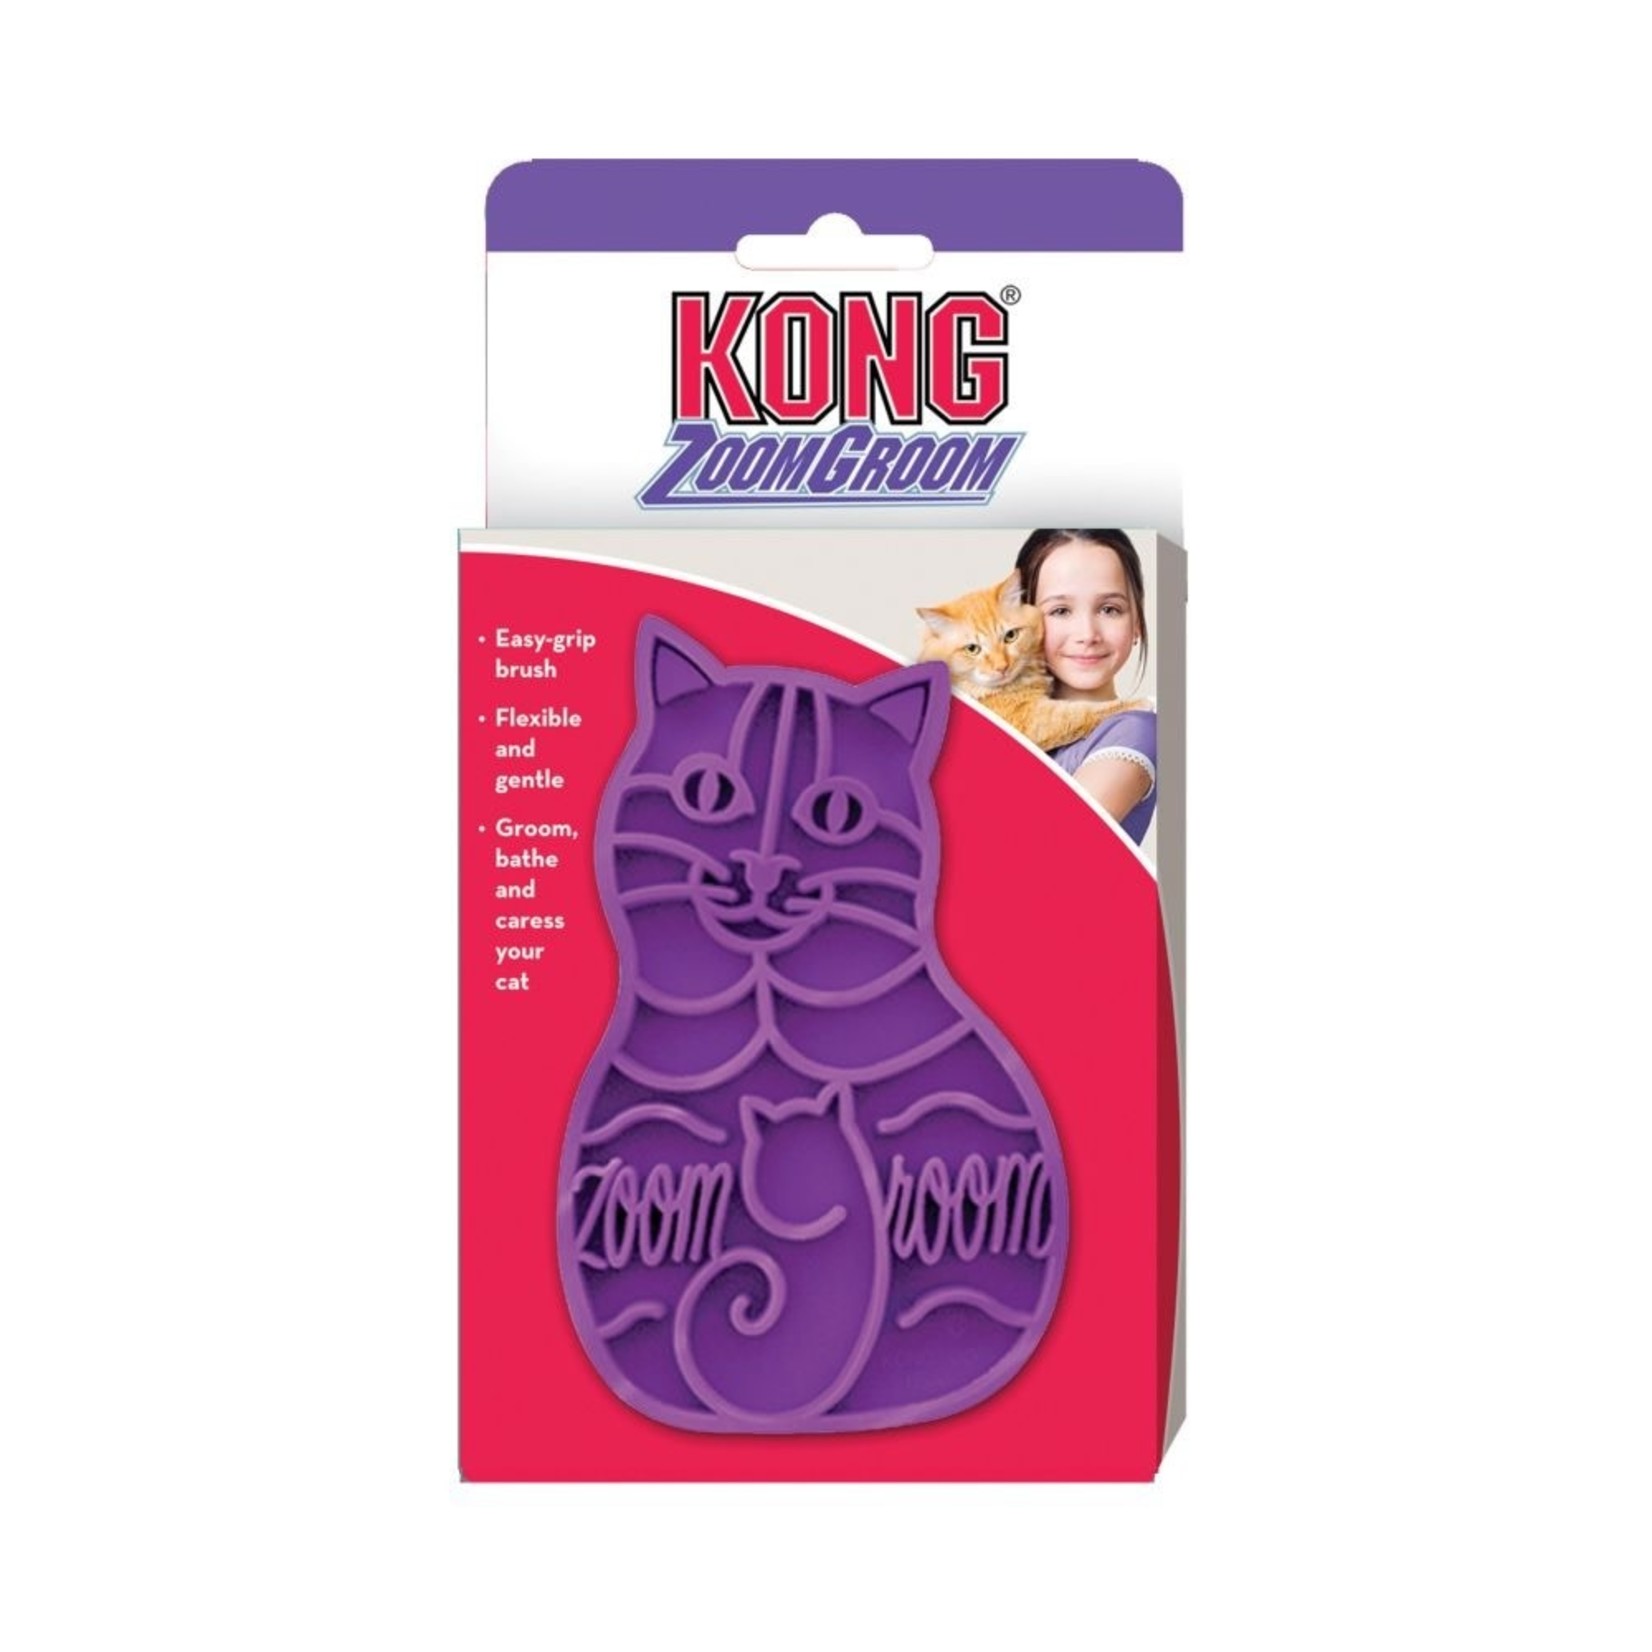 KONG Zoom Groom Brush for Cats